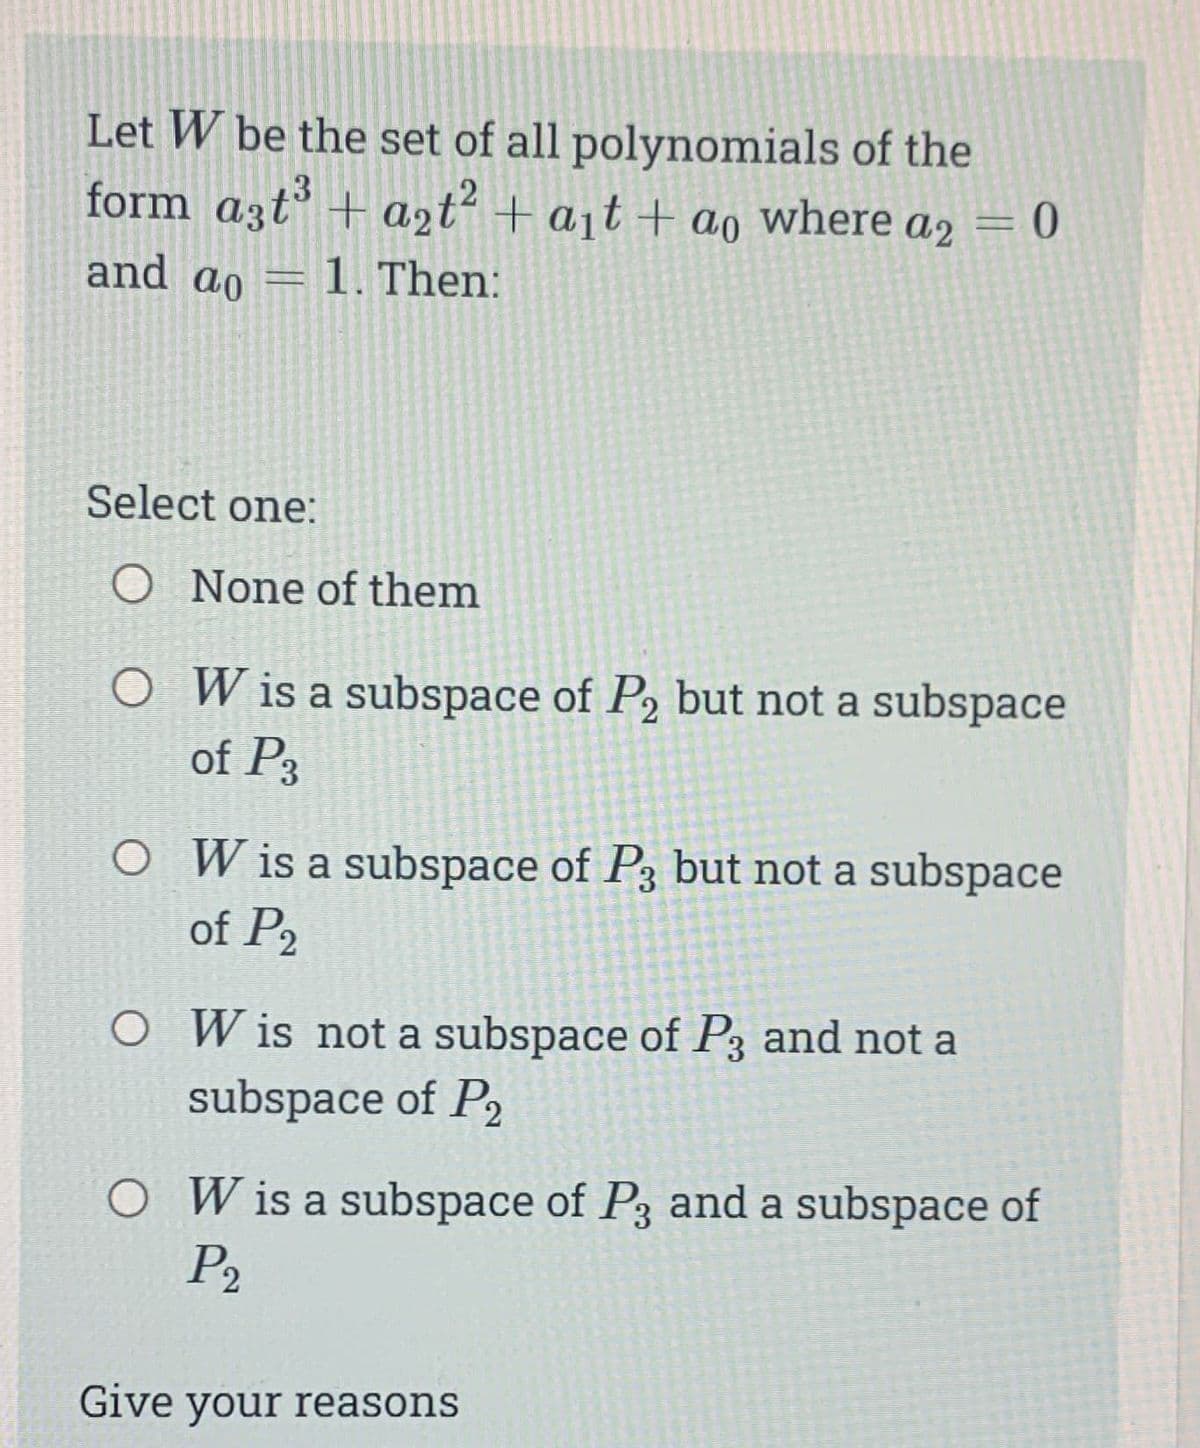 Let W be the set of all polynomials of the
form a3t³ + a₂t² + a₁t+ ao where a2 = 0
2
and ao 1. Then:
-
Select one:
O None of them
O
W is a subspace of P₂ but not a subspace
of P3
O W is a subspace of P3 but not a subspace
of P2
O Wis not a subspace of P3 and not a
subspace of P2
O W is a subspace of P3 and a subspace of
P₂
Give your reasons